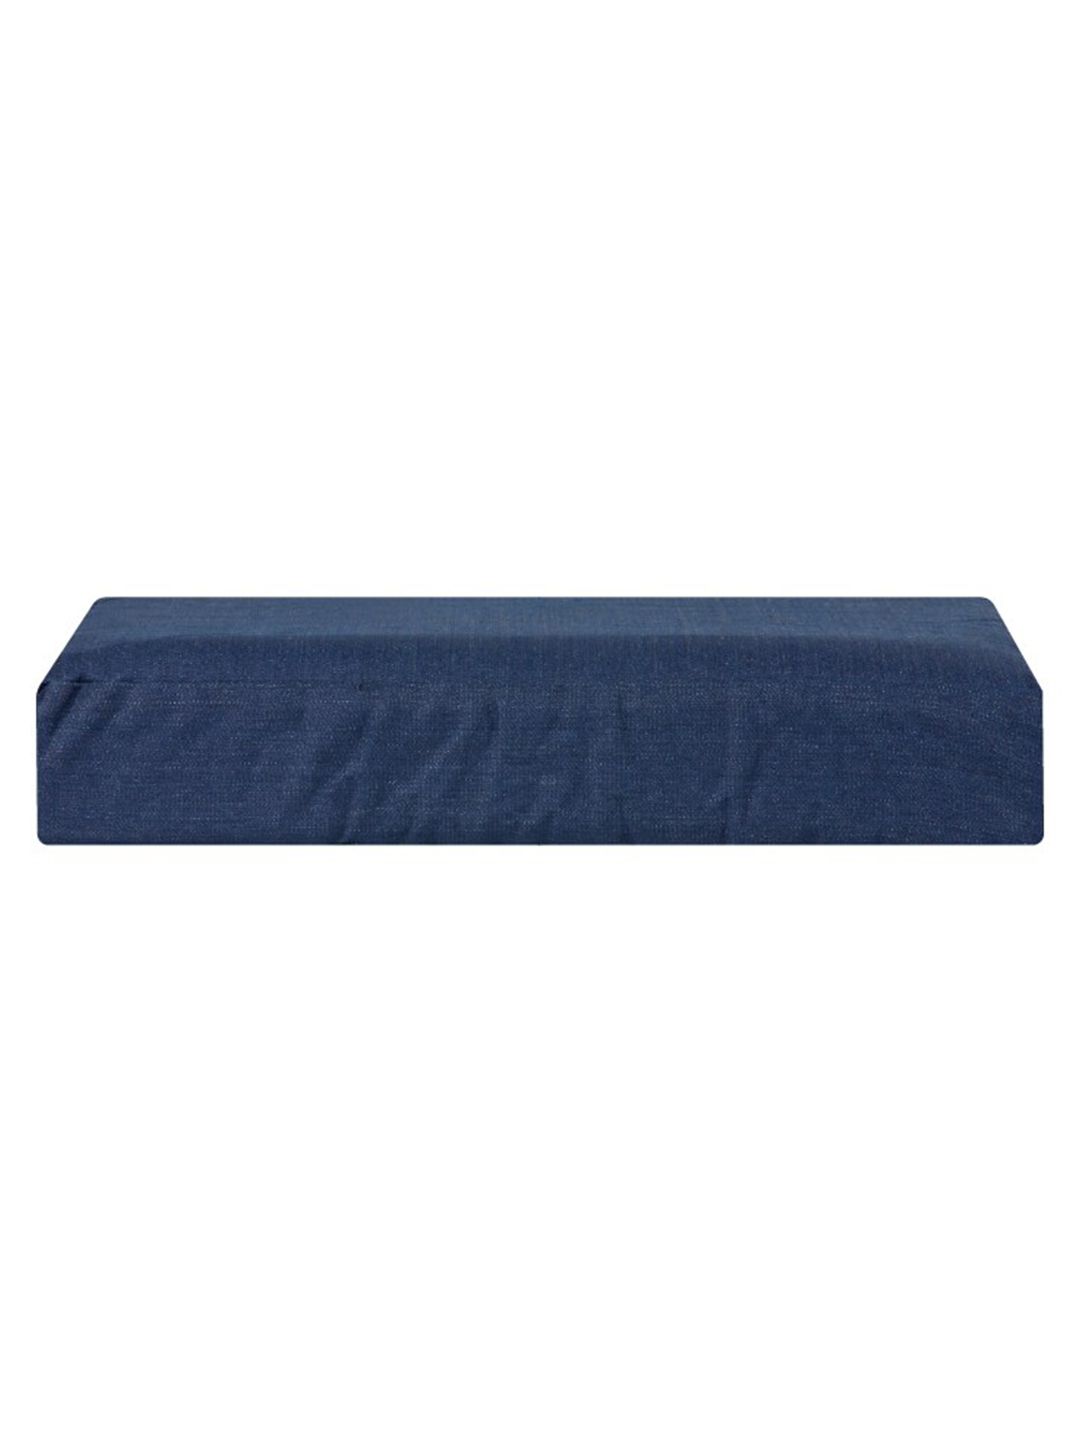 The White Willow Blue Square Cushion Seat Pad Price in India